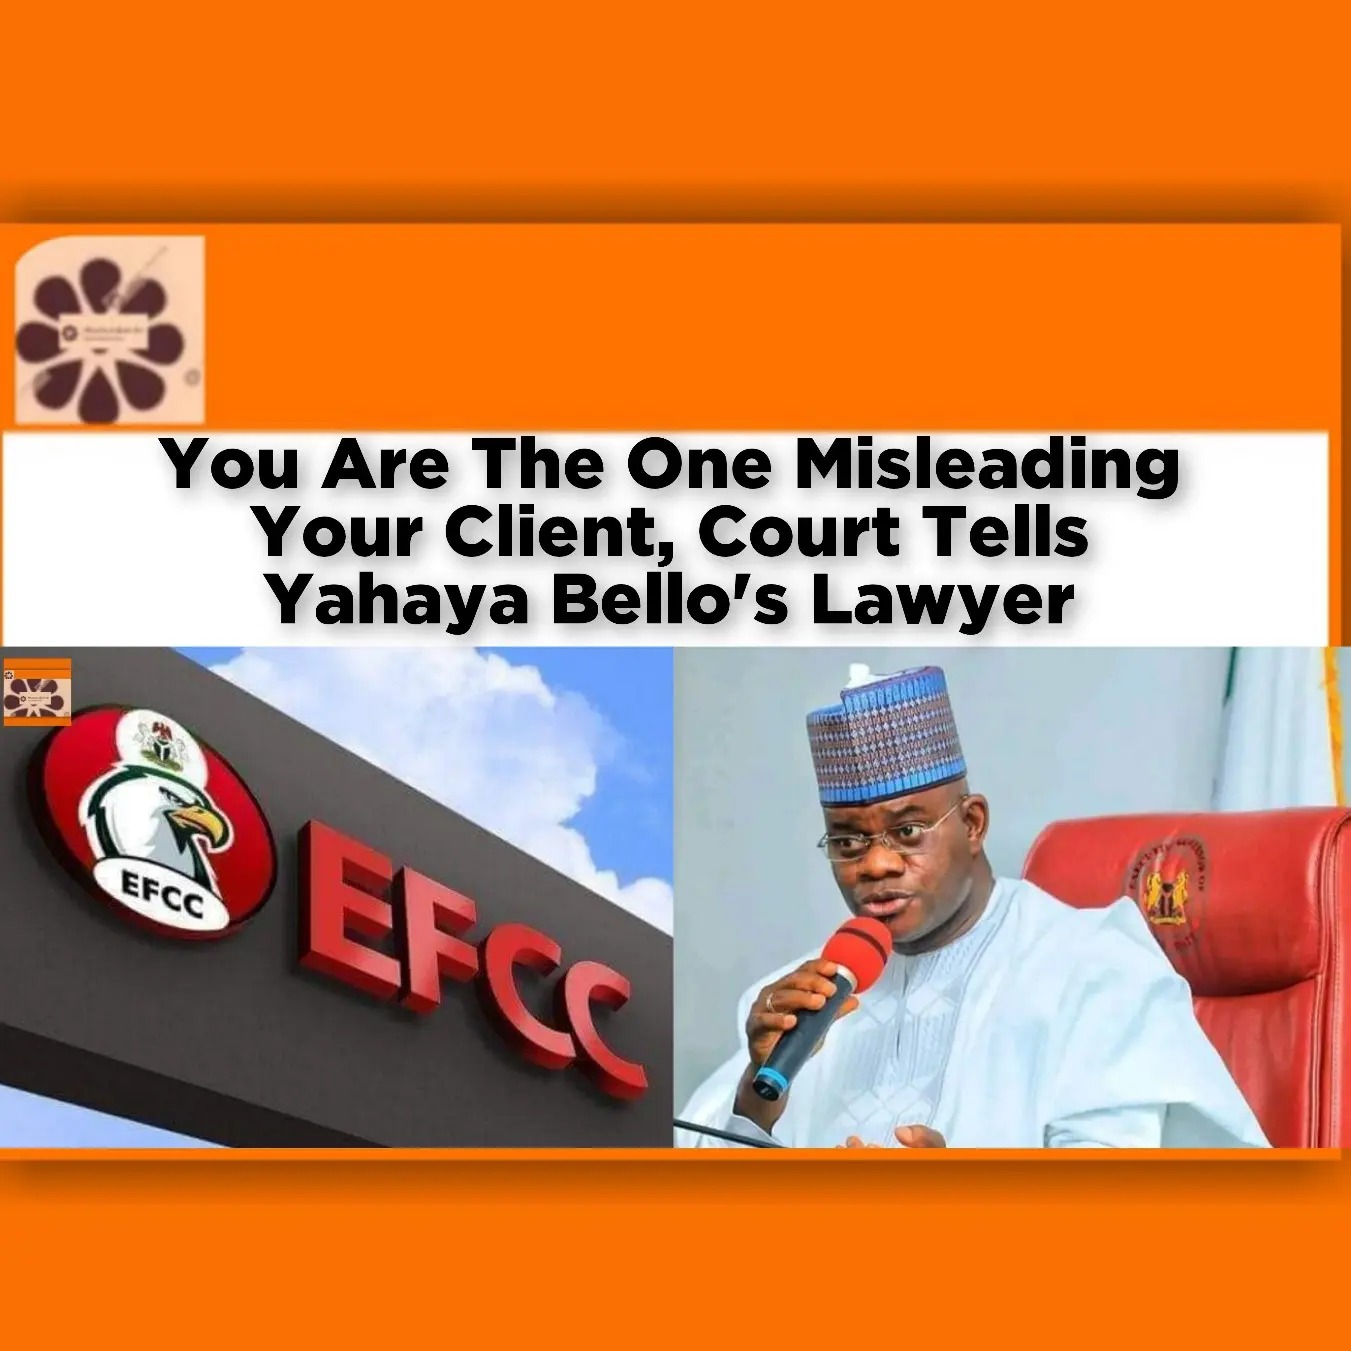 You Are The One Misleading Your Client, Court Tells Yahaya Bello's Lawyer ~ OsazuwaAkonedo #Northeast